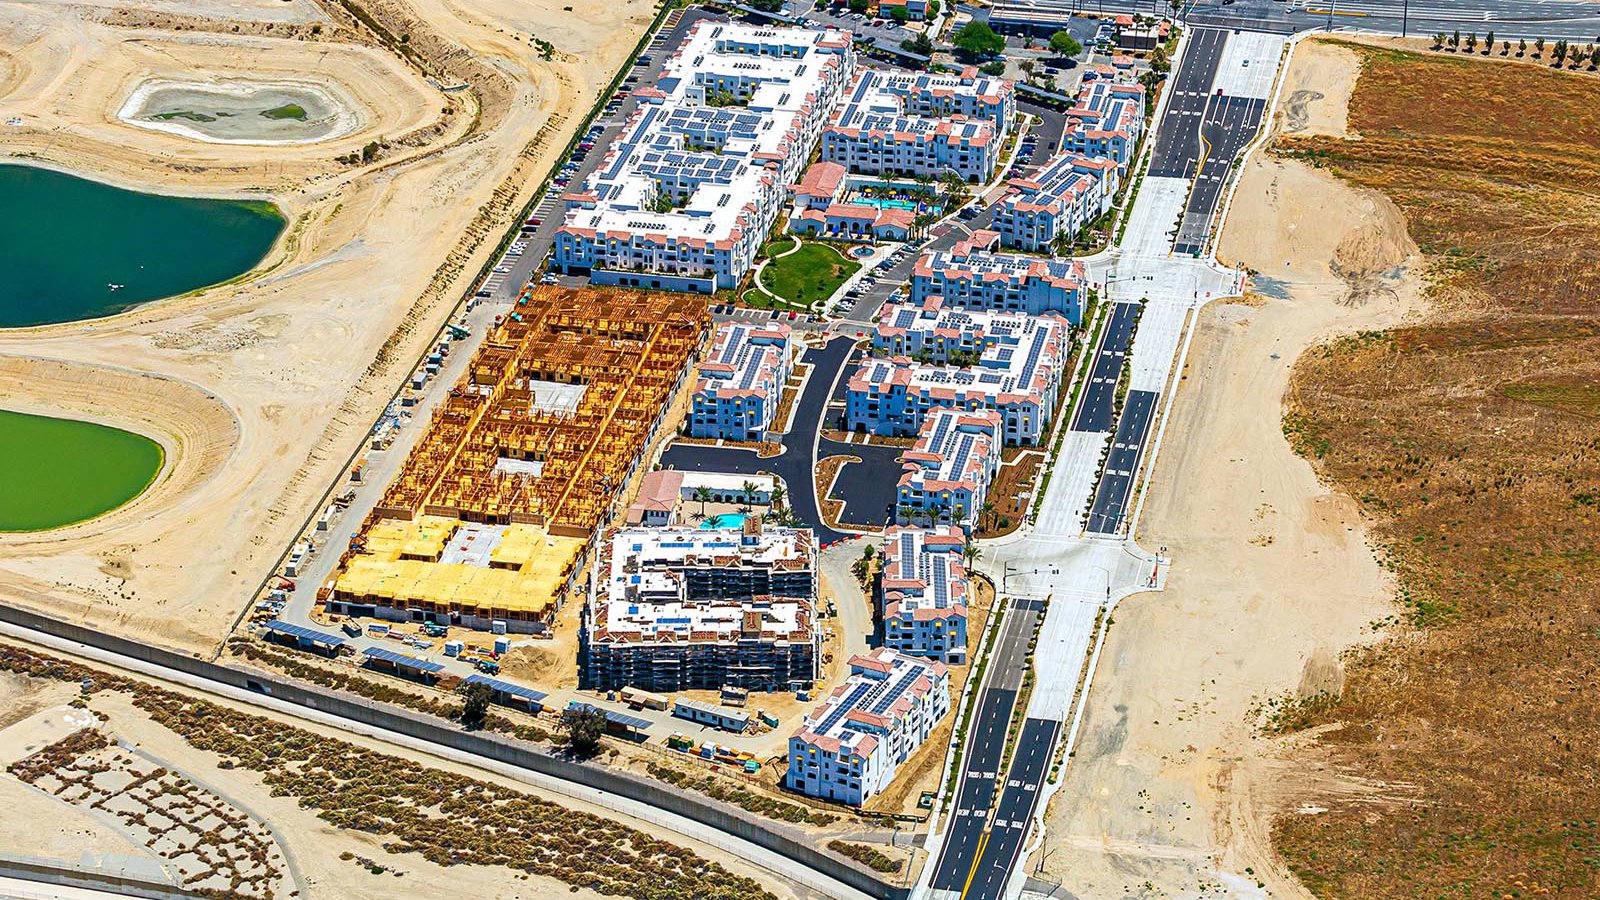 Construction photo of luxury apartments being constructed in Ontario, California